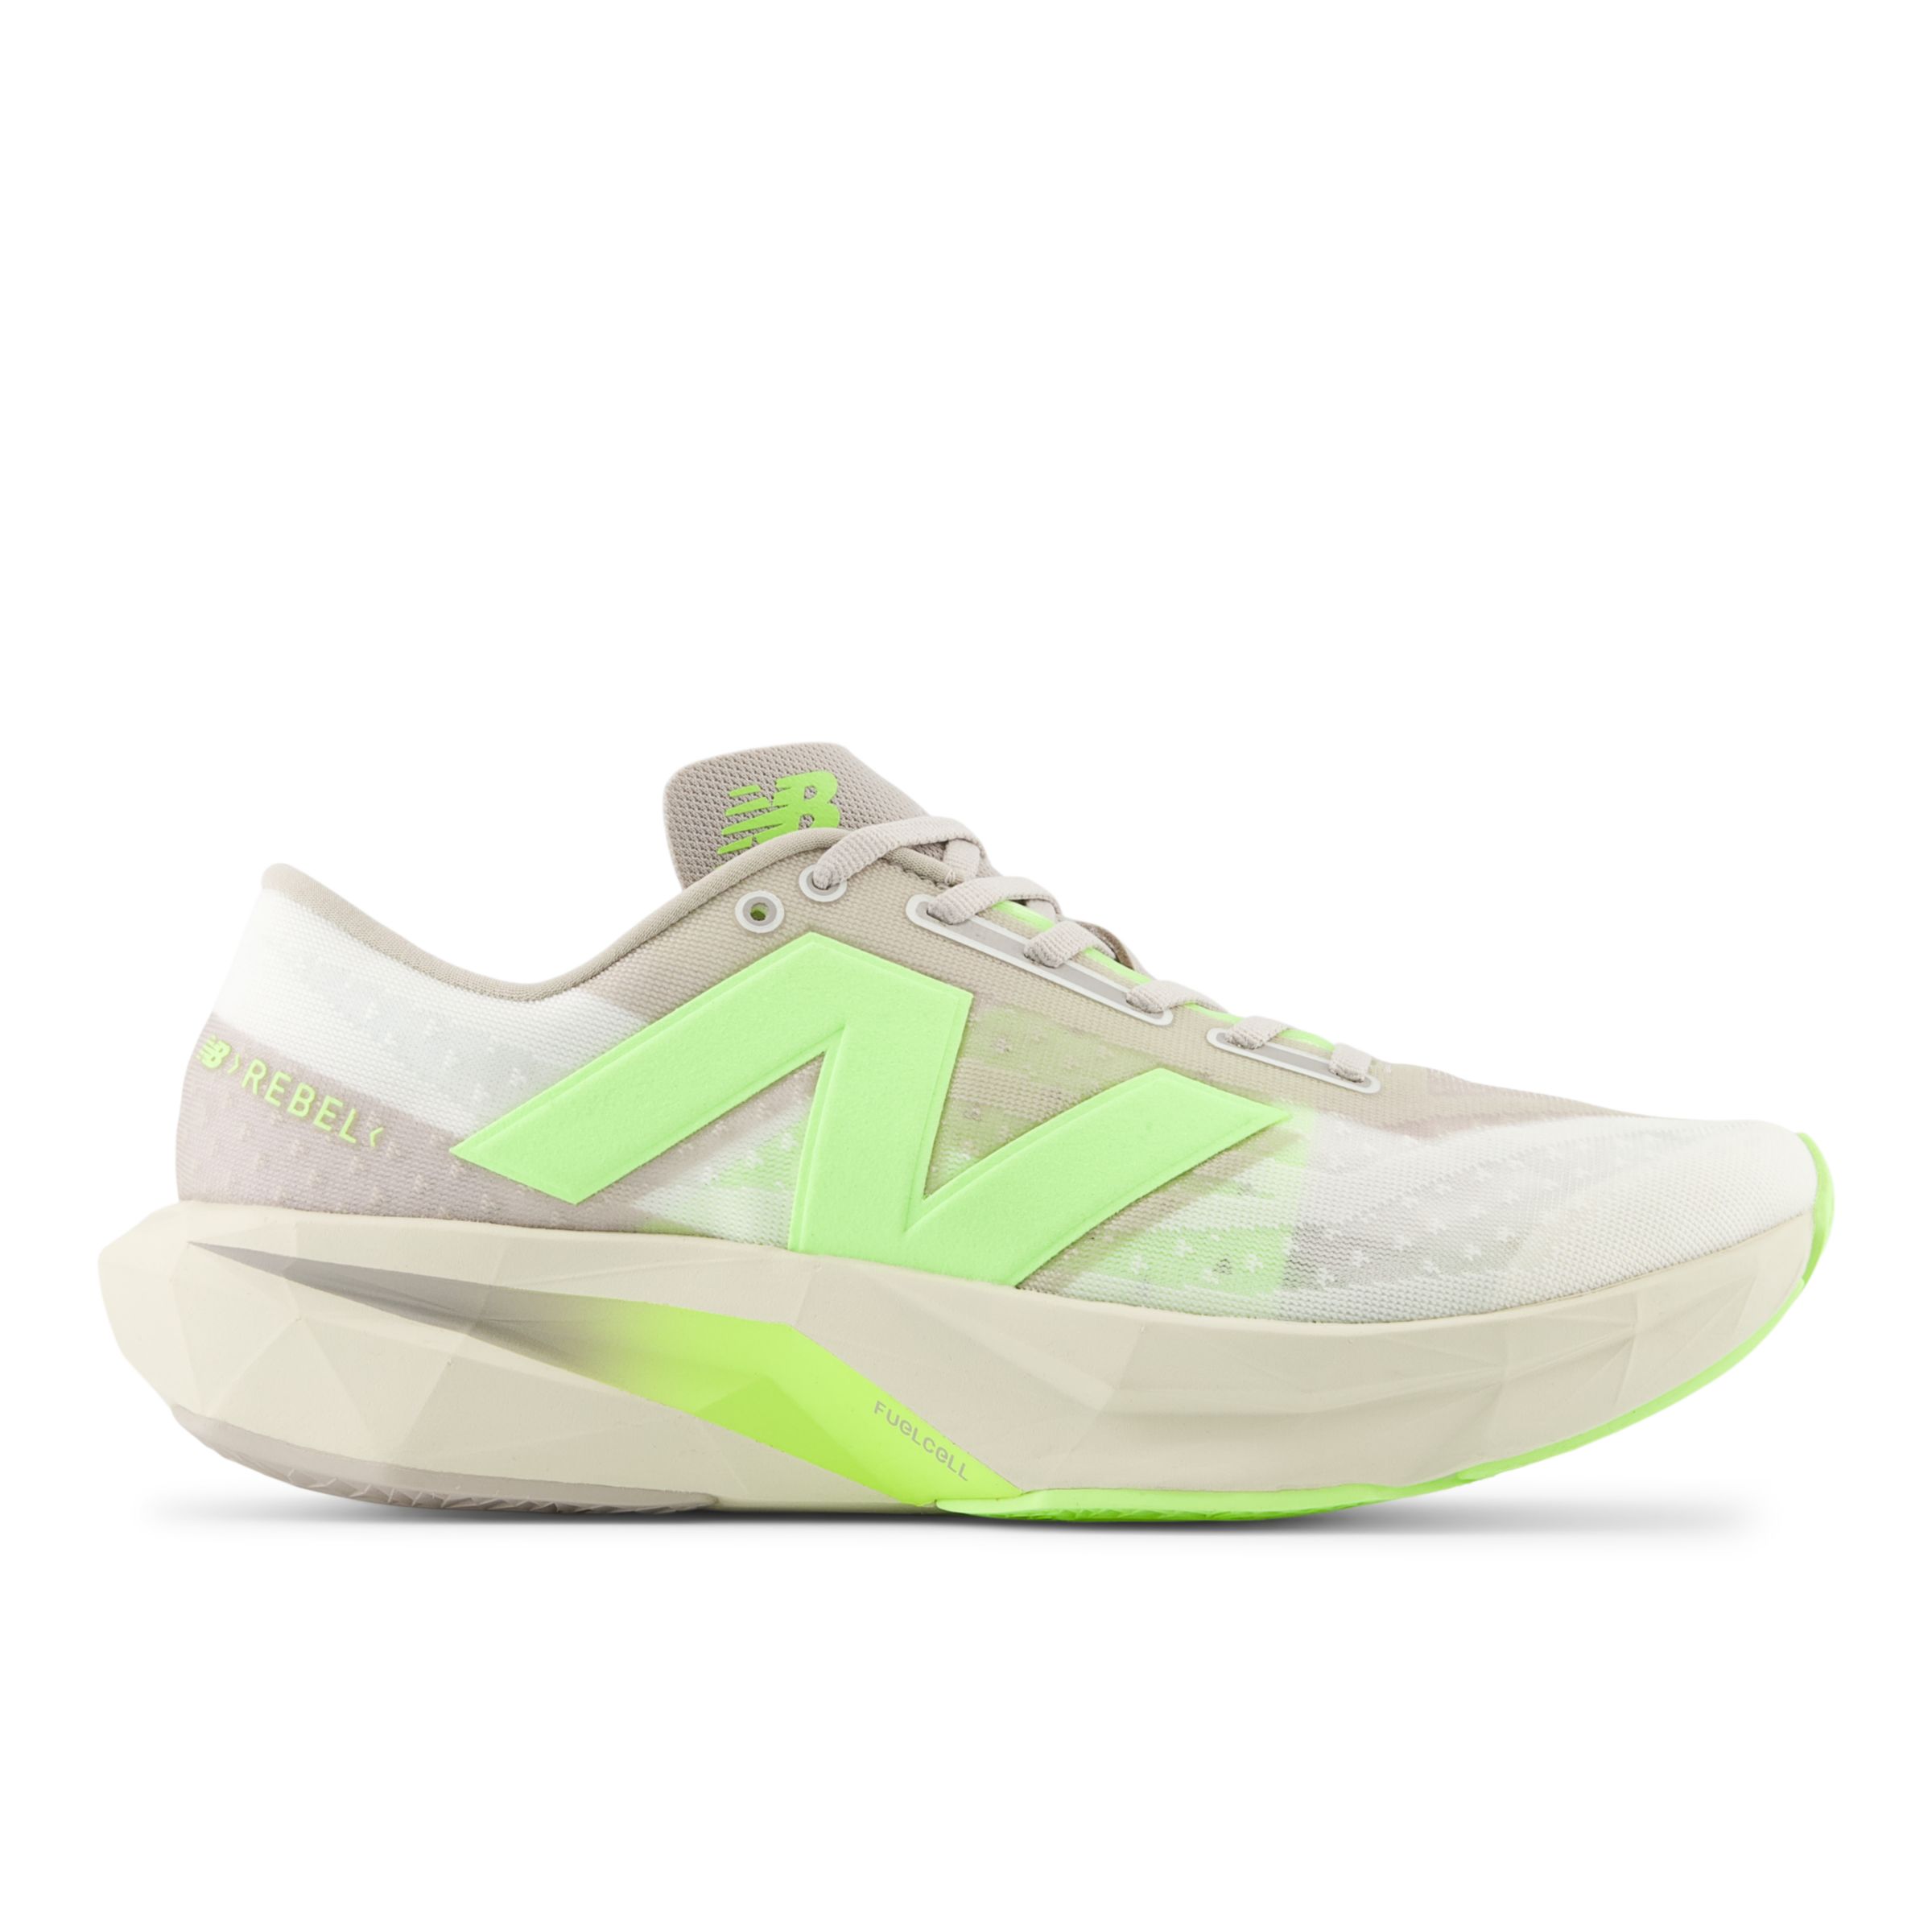 New Balance Men's Fuelcell Rebel V4 Running Shoes In Multi